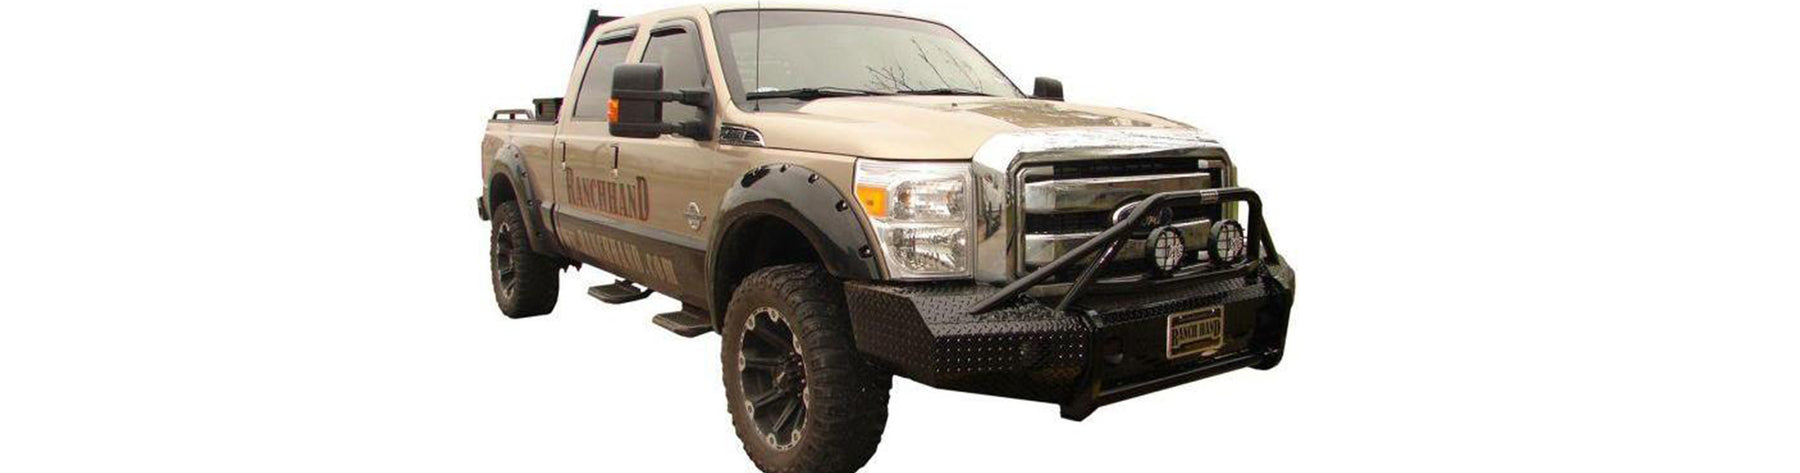 Ranch Hand BSF111BL1 Summit Bullnose Front Bumper 2011-2016 Ford F250/350/450/550